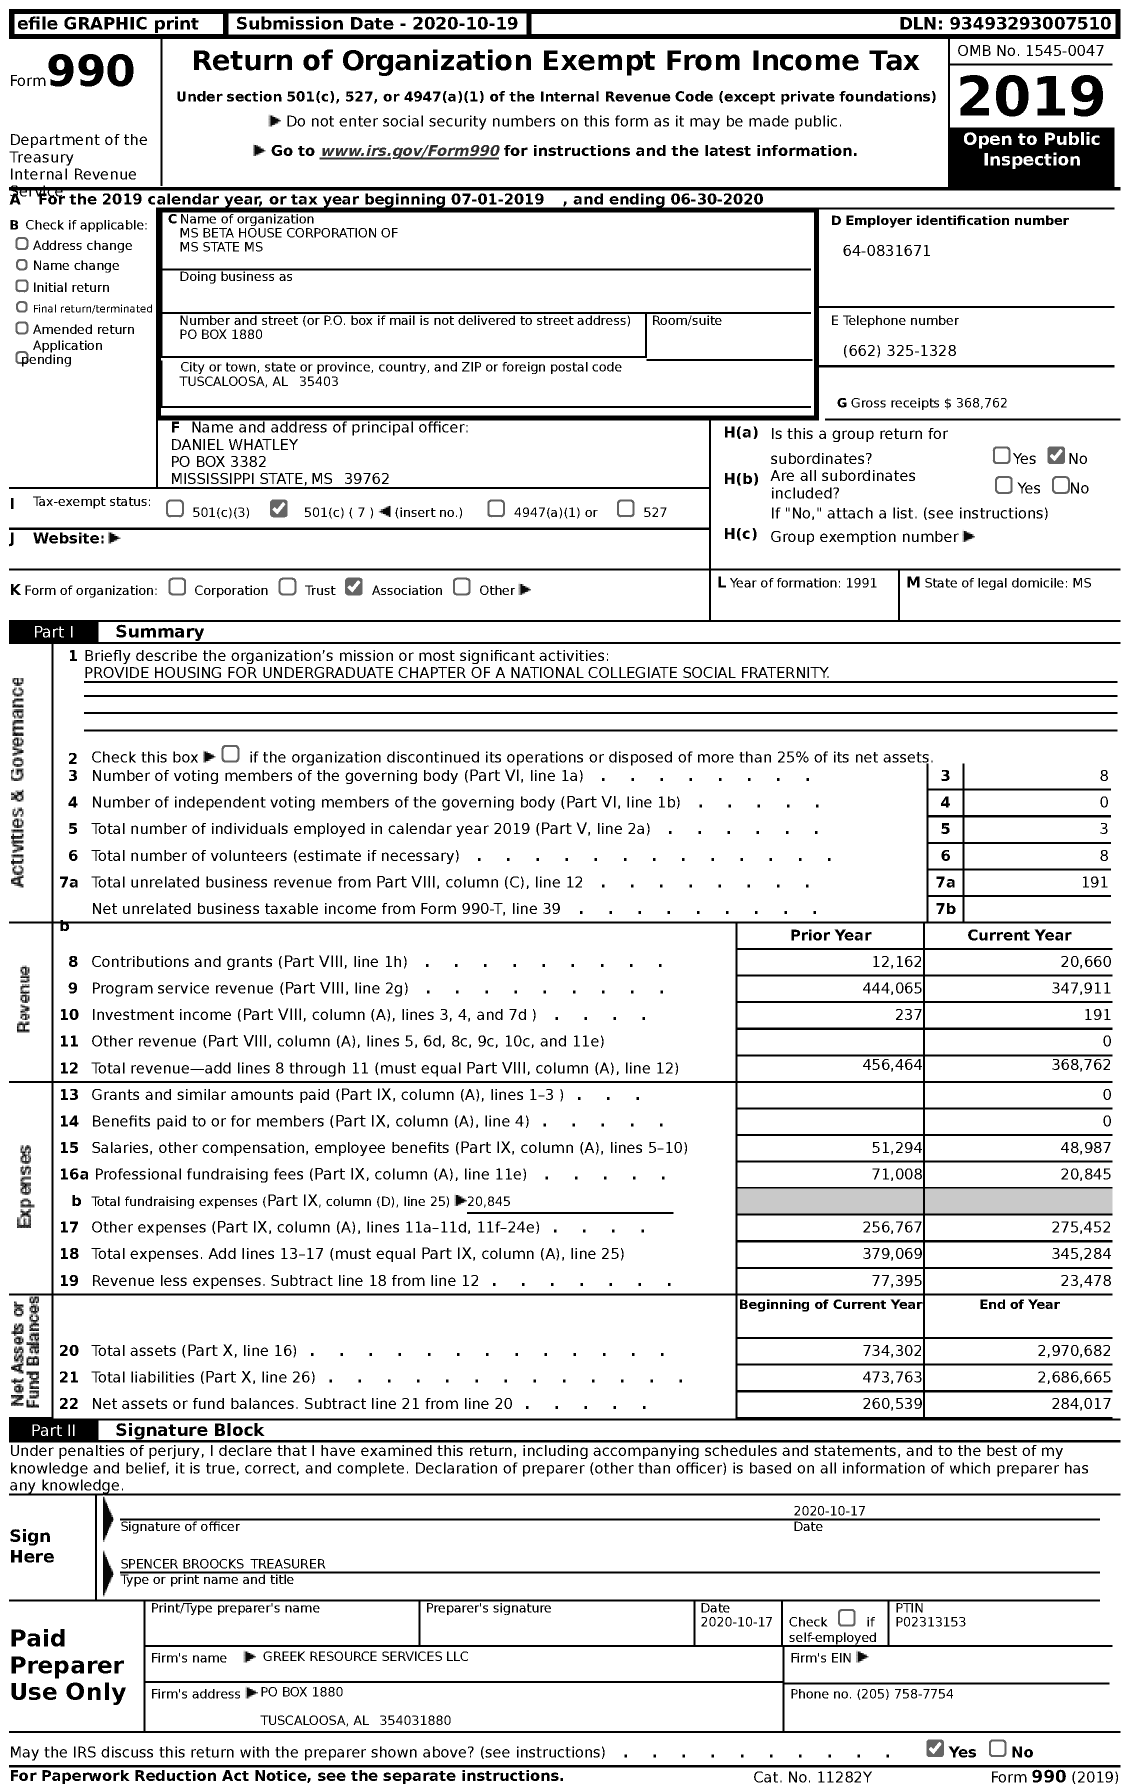 Image of first page of 2019 Form 990 for MS Beta House Corporation of MS State MS